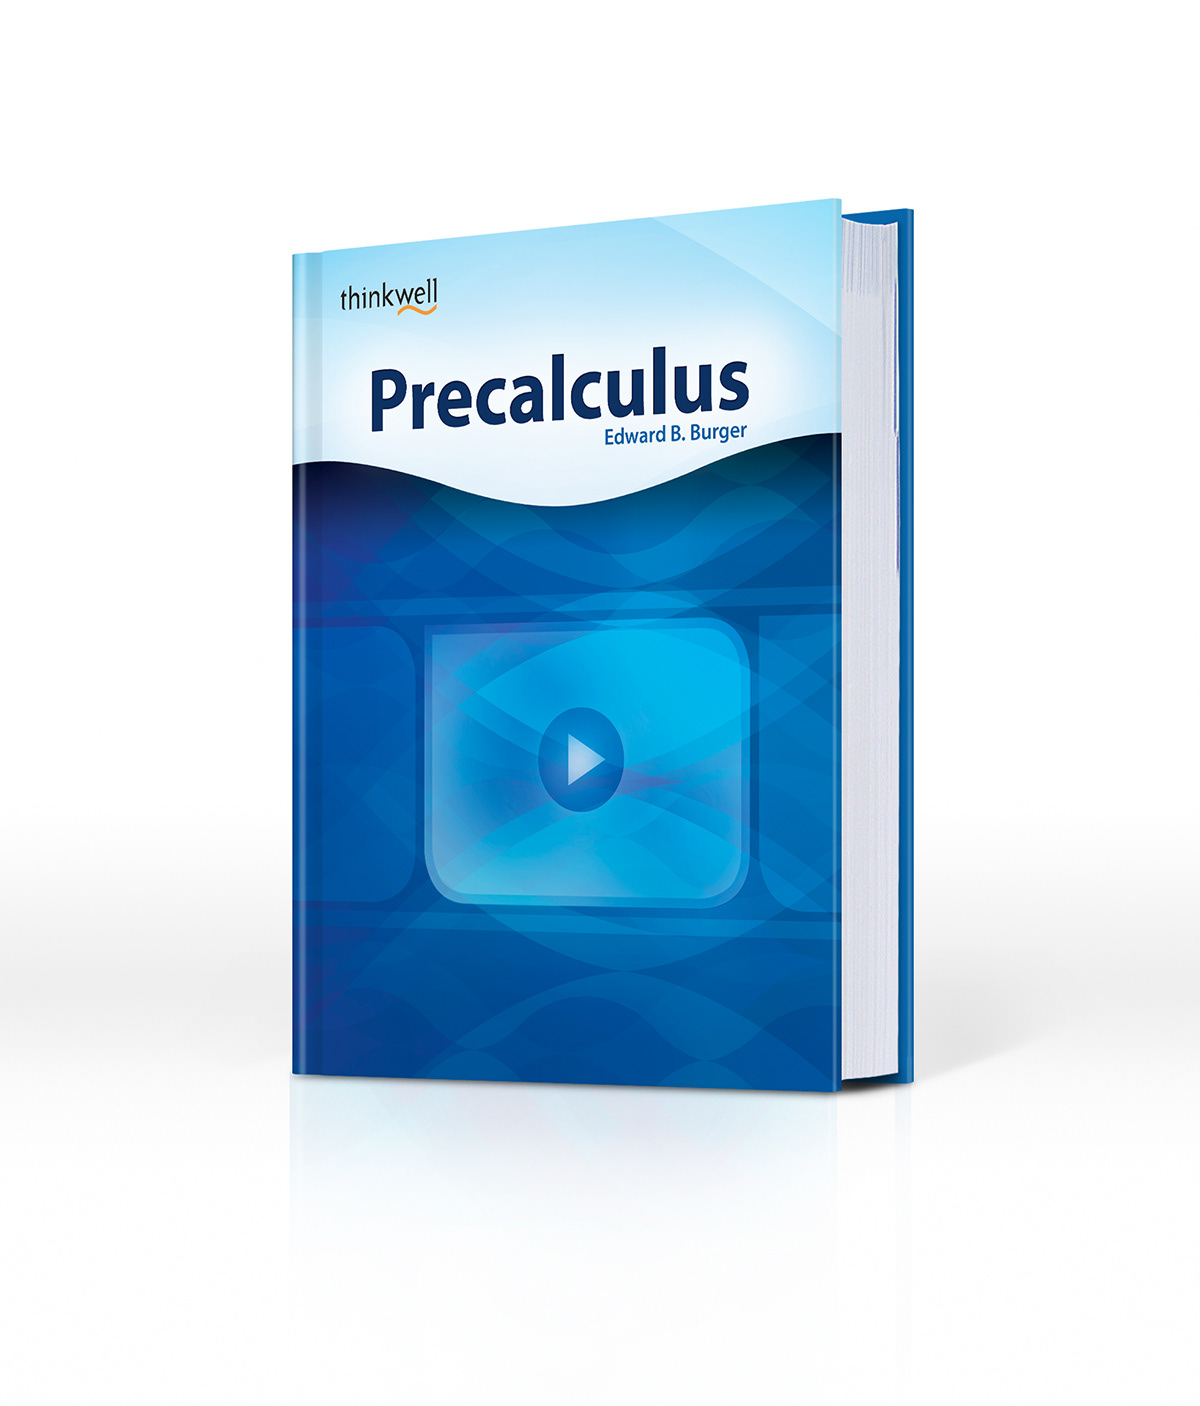 thinkwell Precalculus textbook educational publishing   book cover design